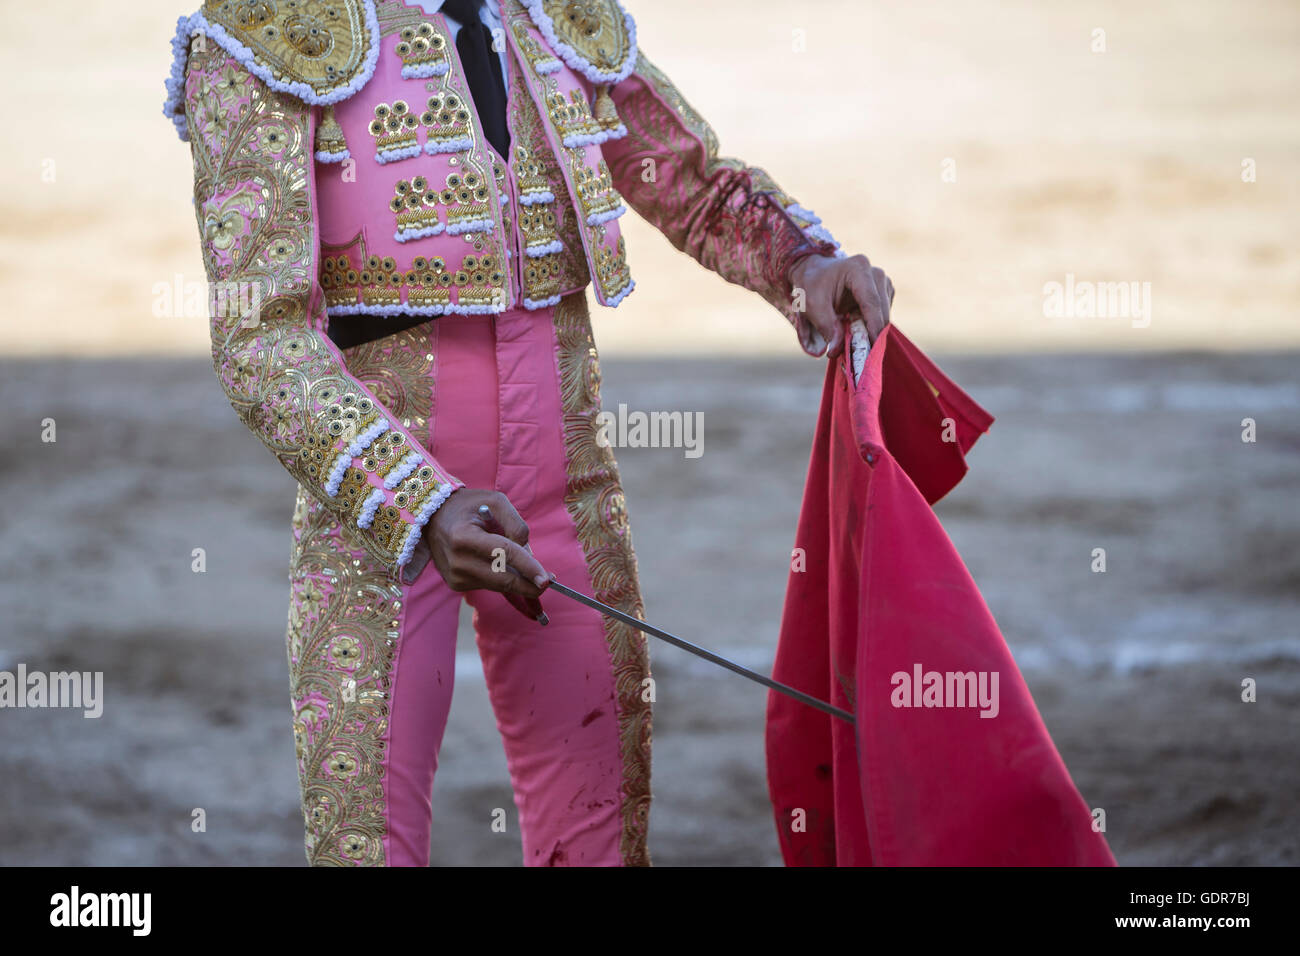 Bullfighter Curro Diaz bullfighting with the crutch in the Bullring of Linares, Spain Stock Photo